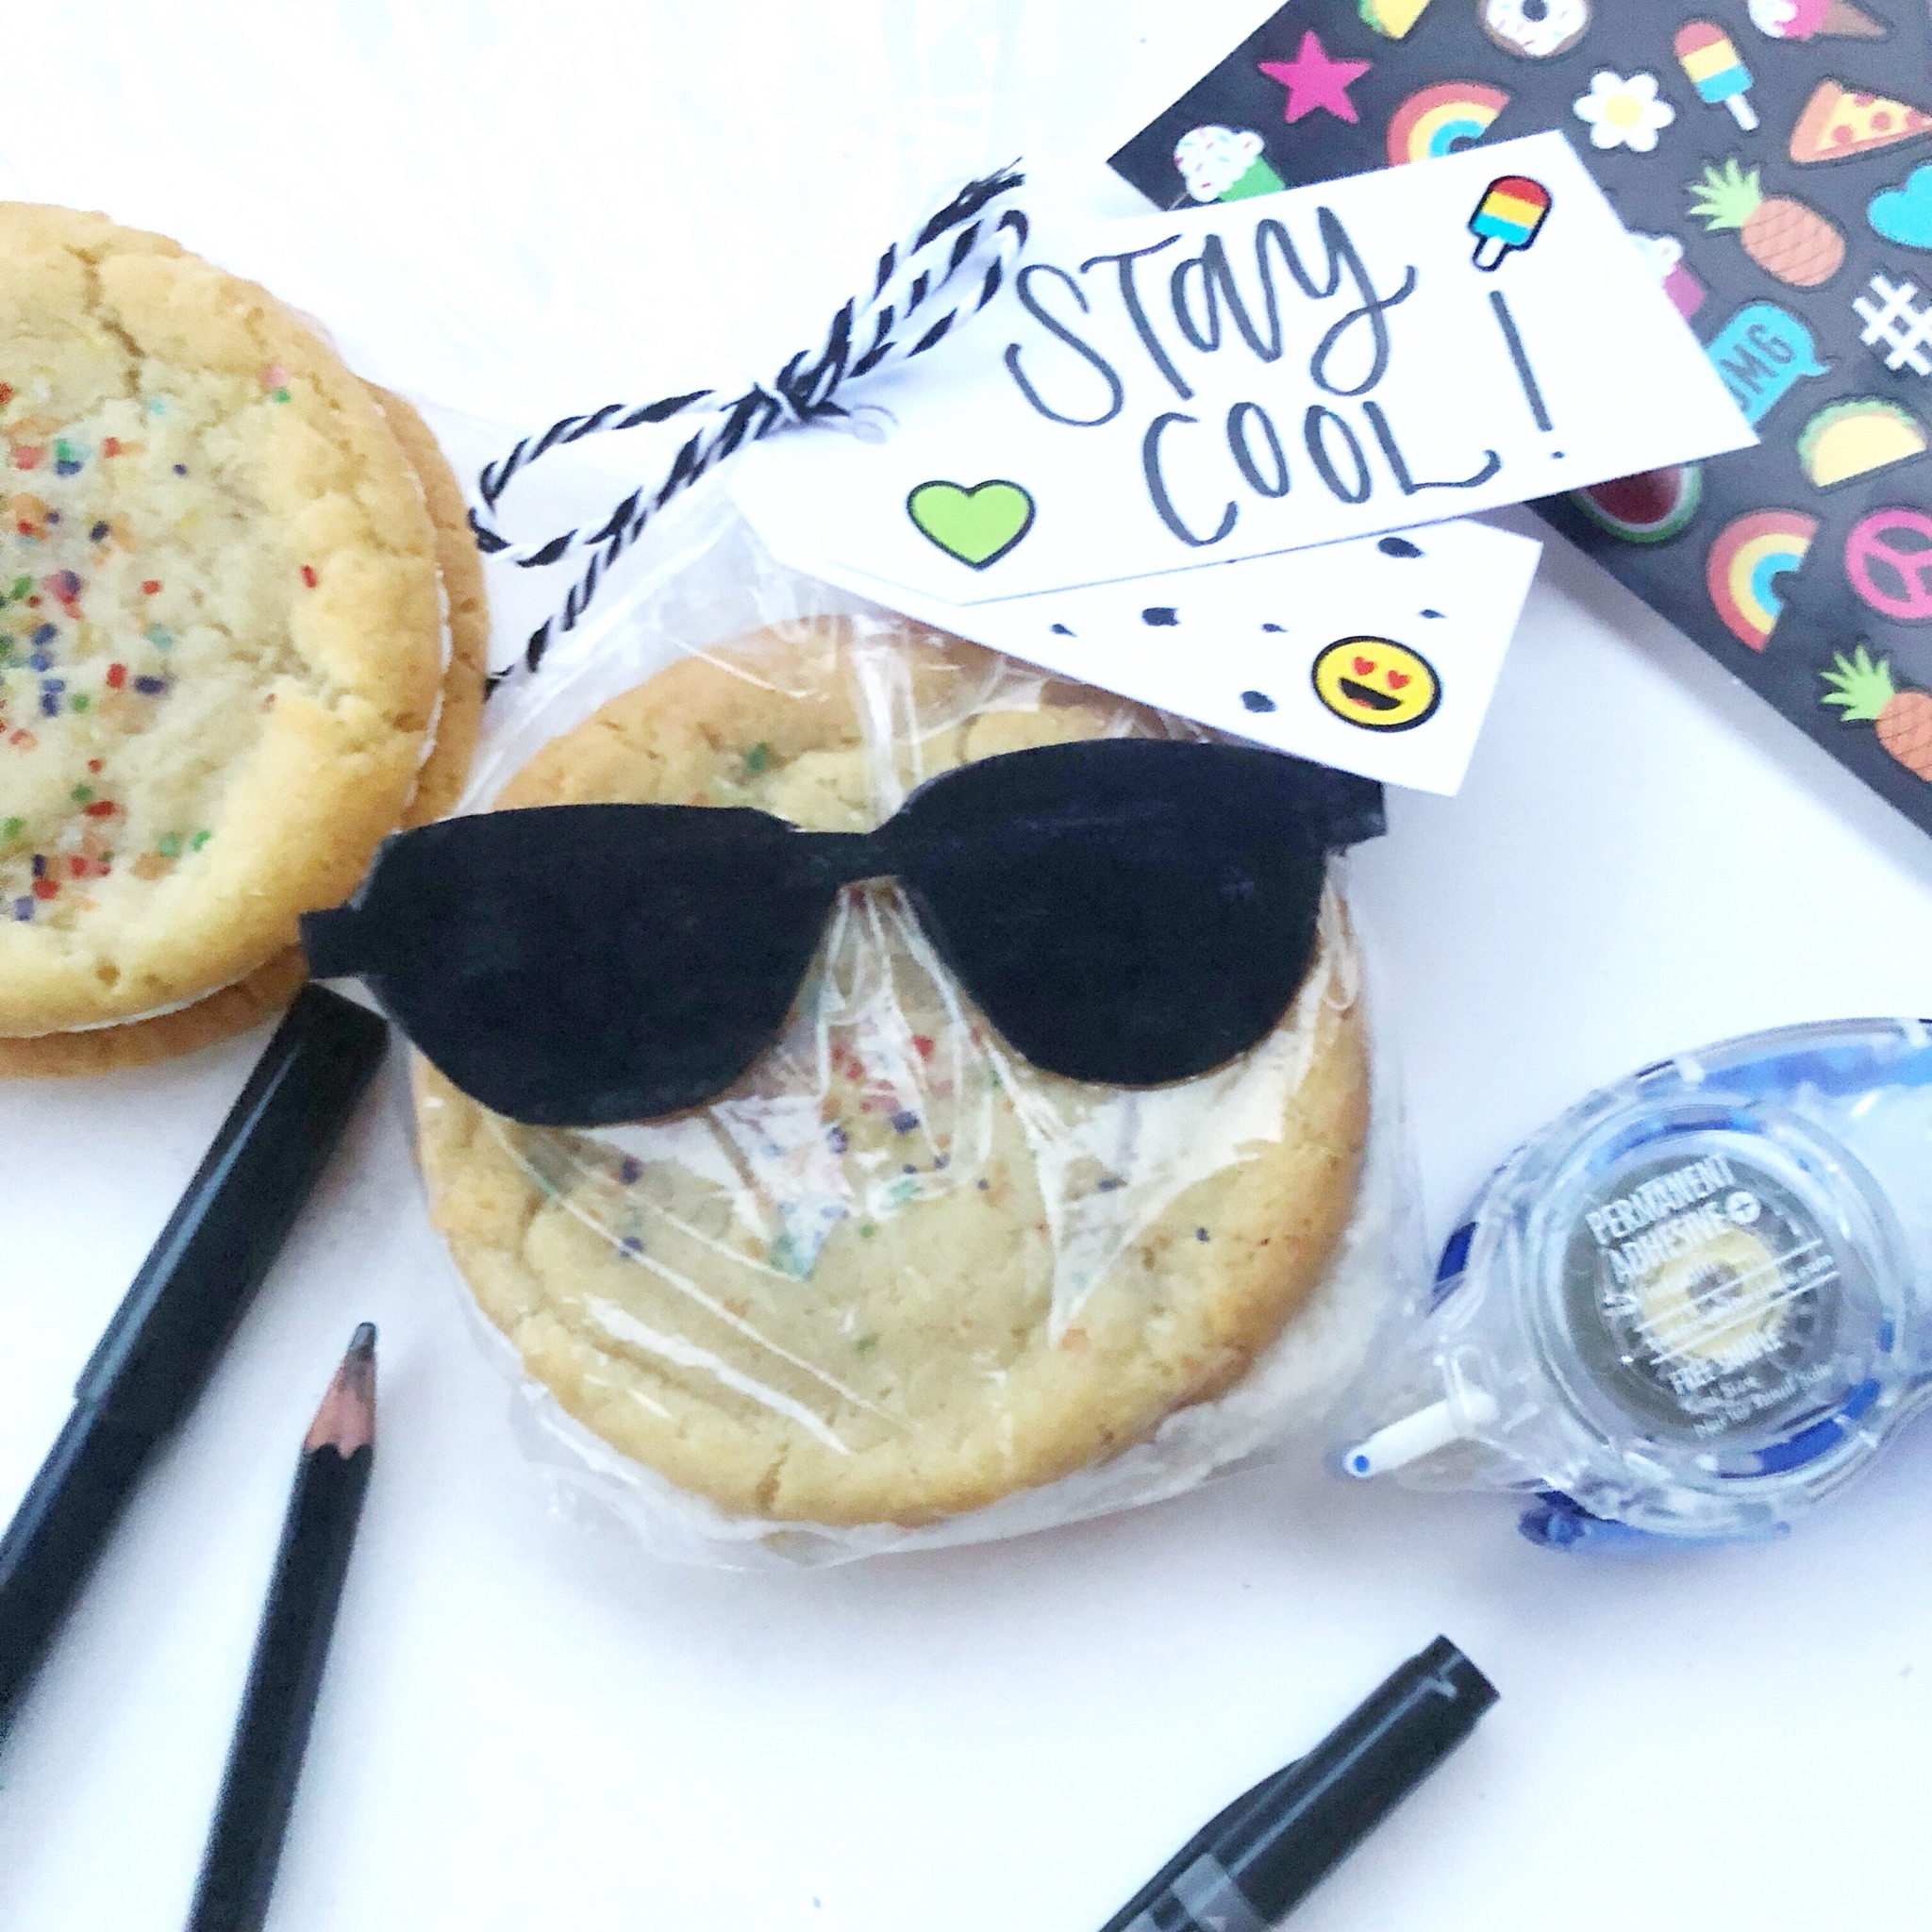 Lauren Fitzmaurice of Renmade Calligraphy show you how to create a fun emoji inspired favor bag that is perfect for my summer time event! The tutorial uses awesome lettering and craft tools from Tombowusa.com.